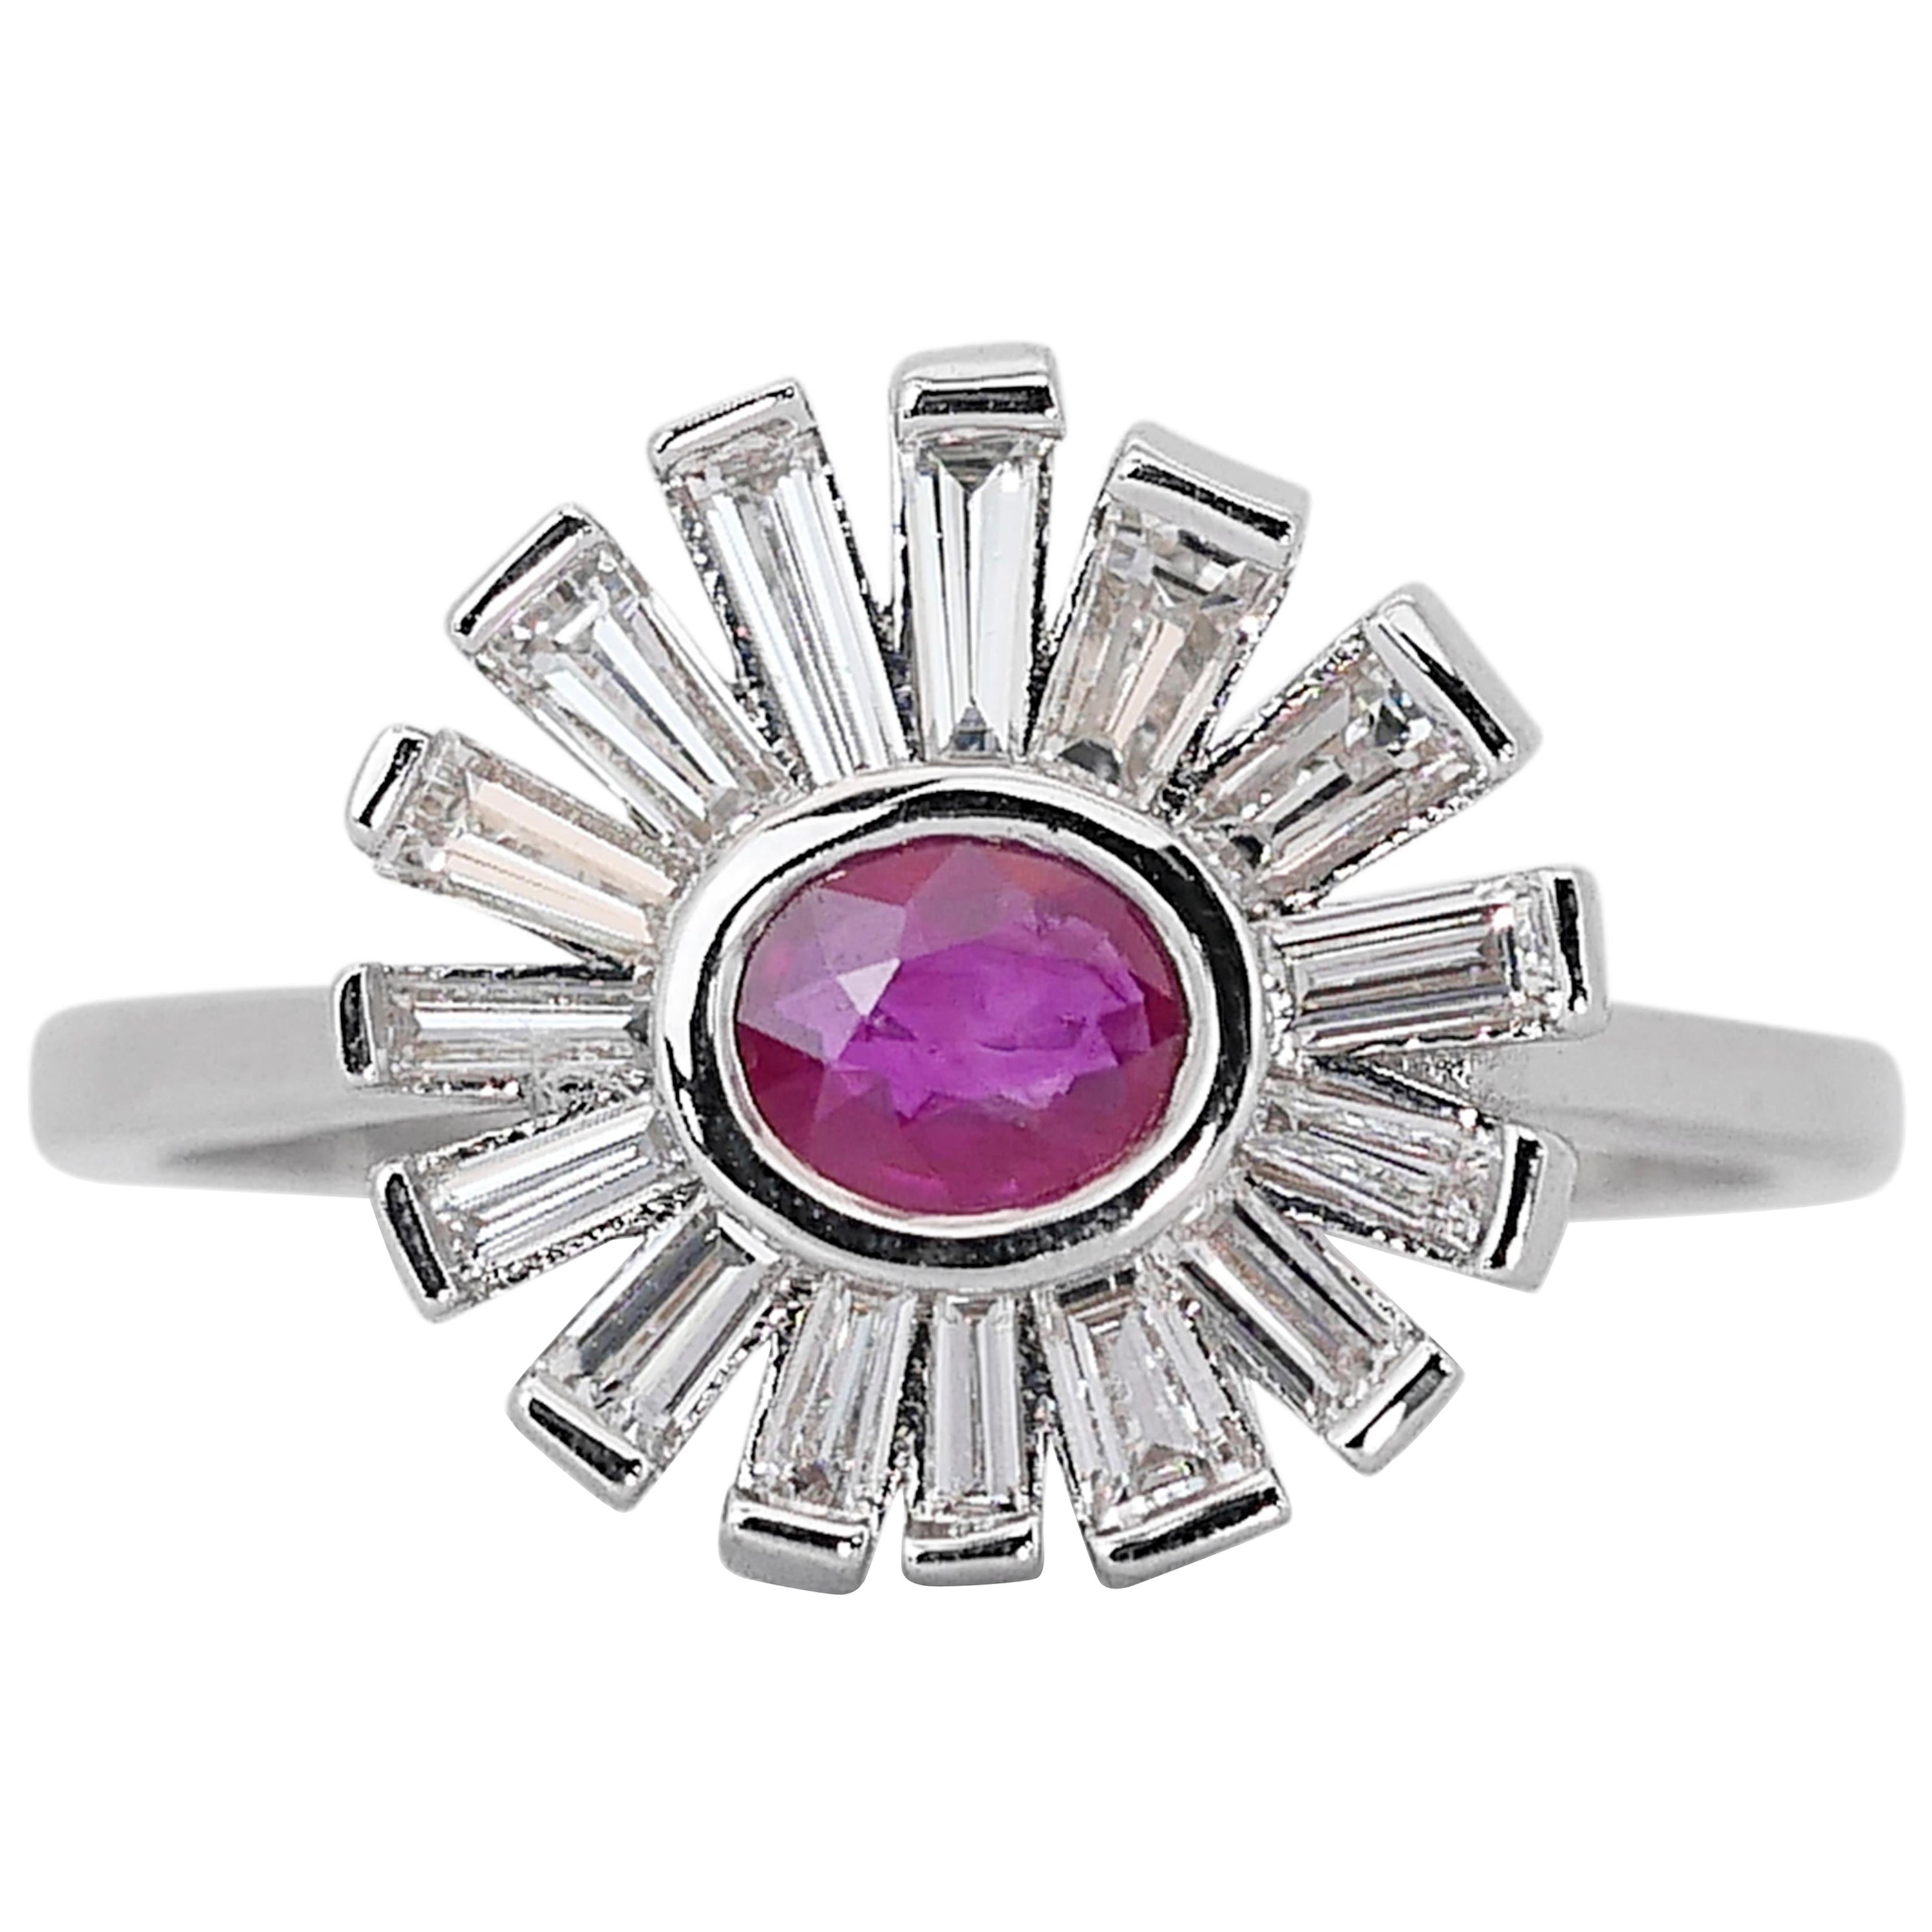 Stunning 1.20ct Ruby and Diamonds Halo Ring in 18k White Gold - IGI Certified For Sale